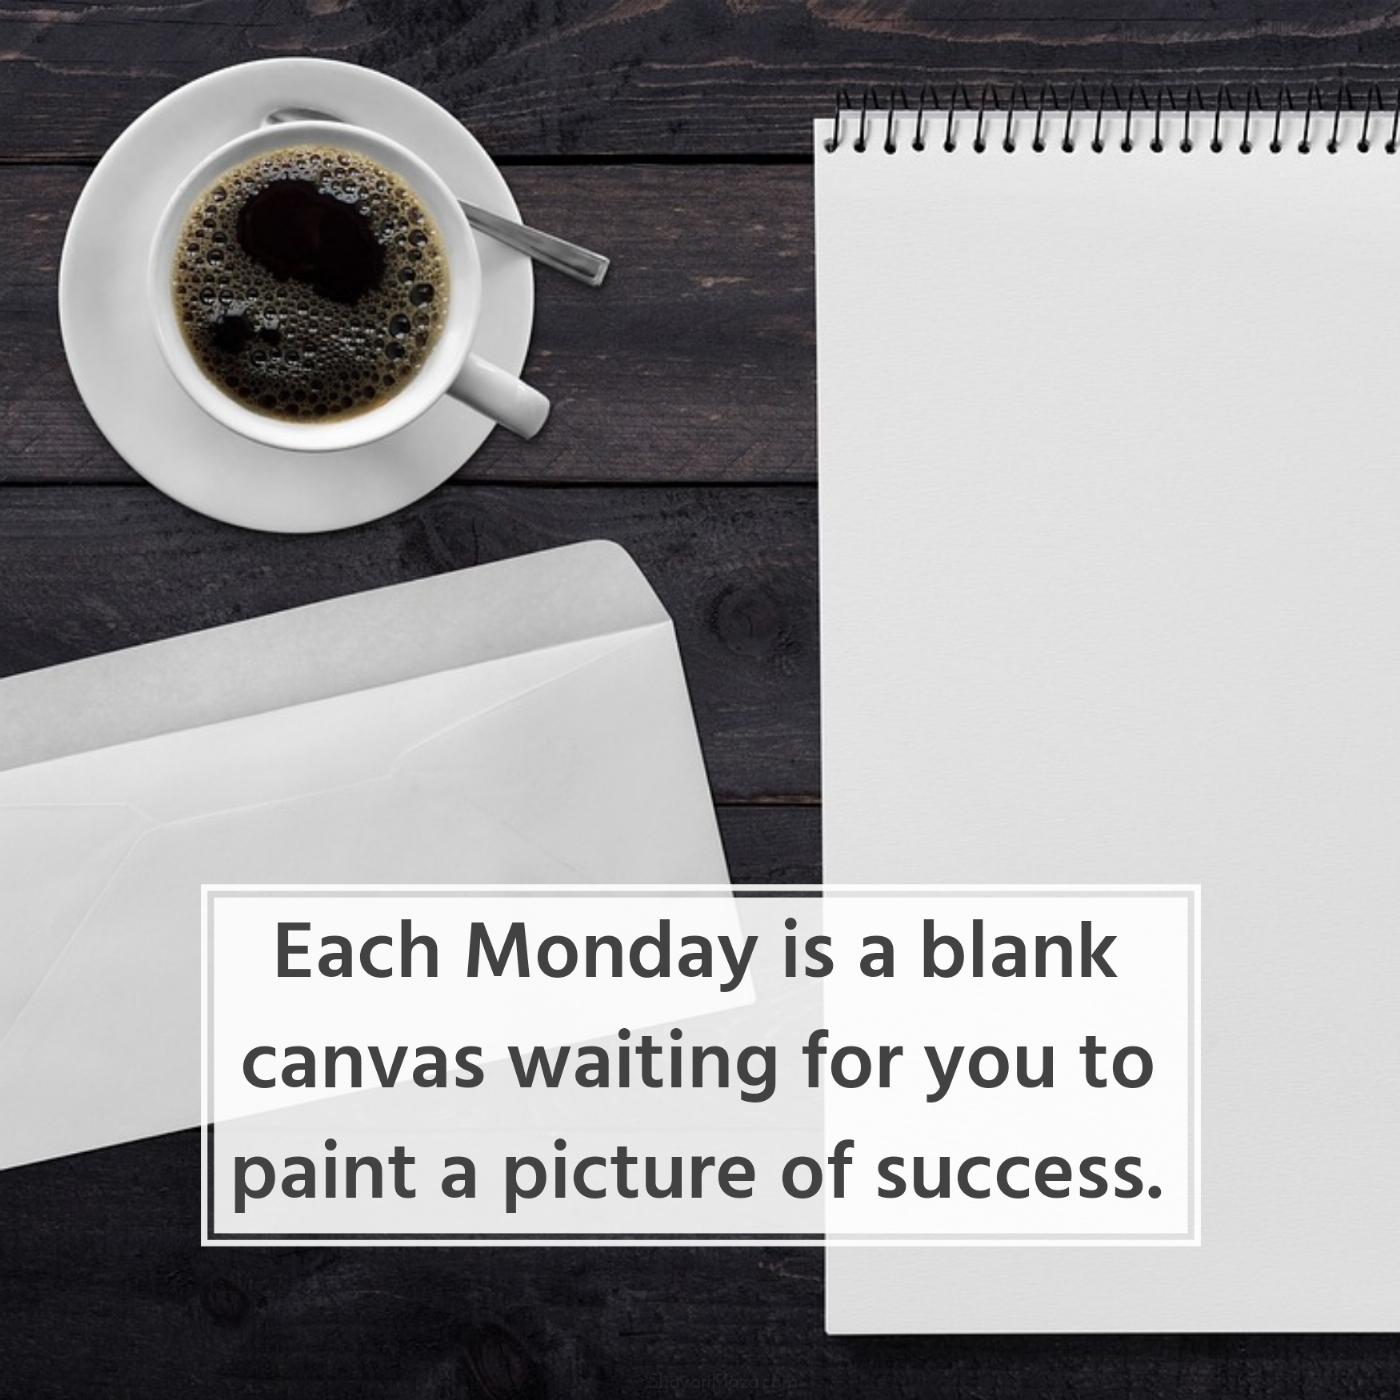 Each Monday is a blank canvas waiting for you to paint